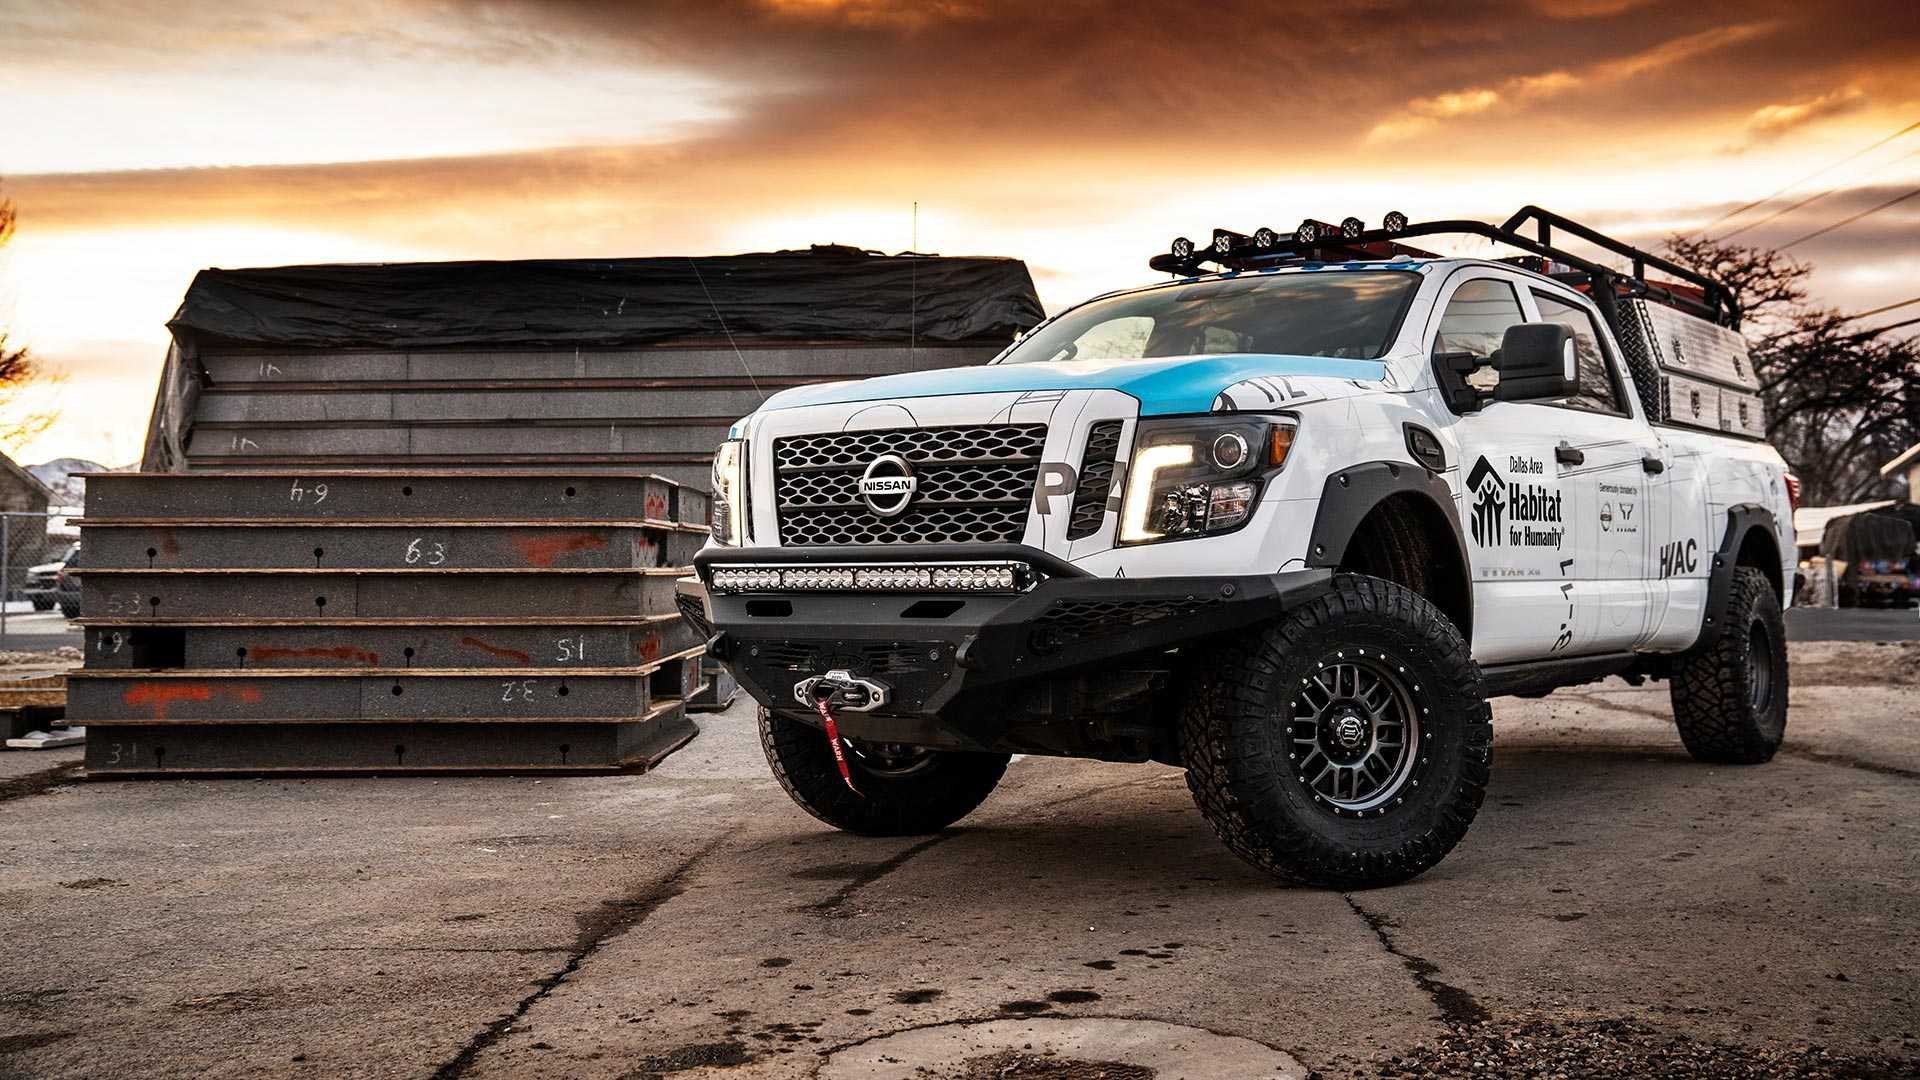 Nissan Truck Accessories - Best List for Upgrading Your Ride in %%currentyear%% |